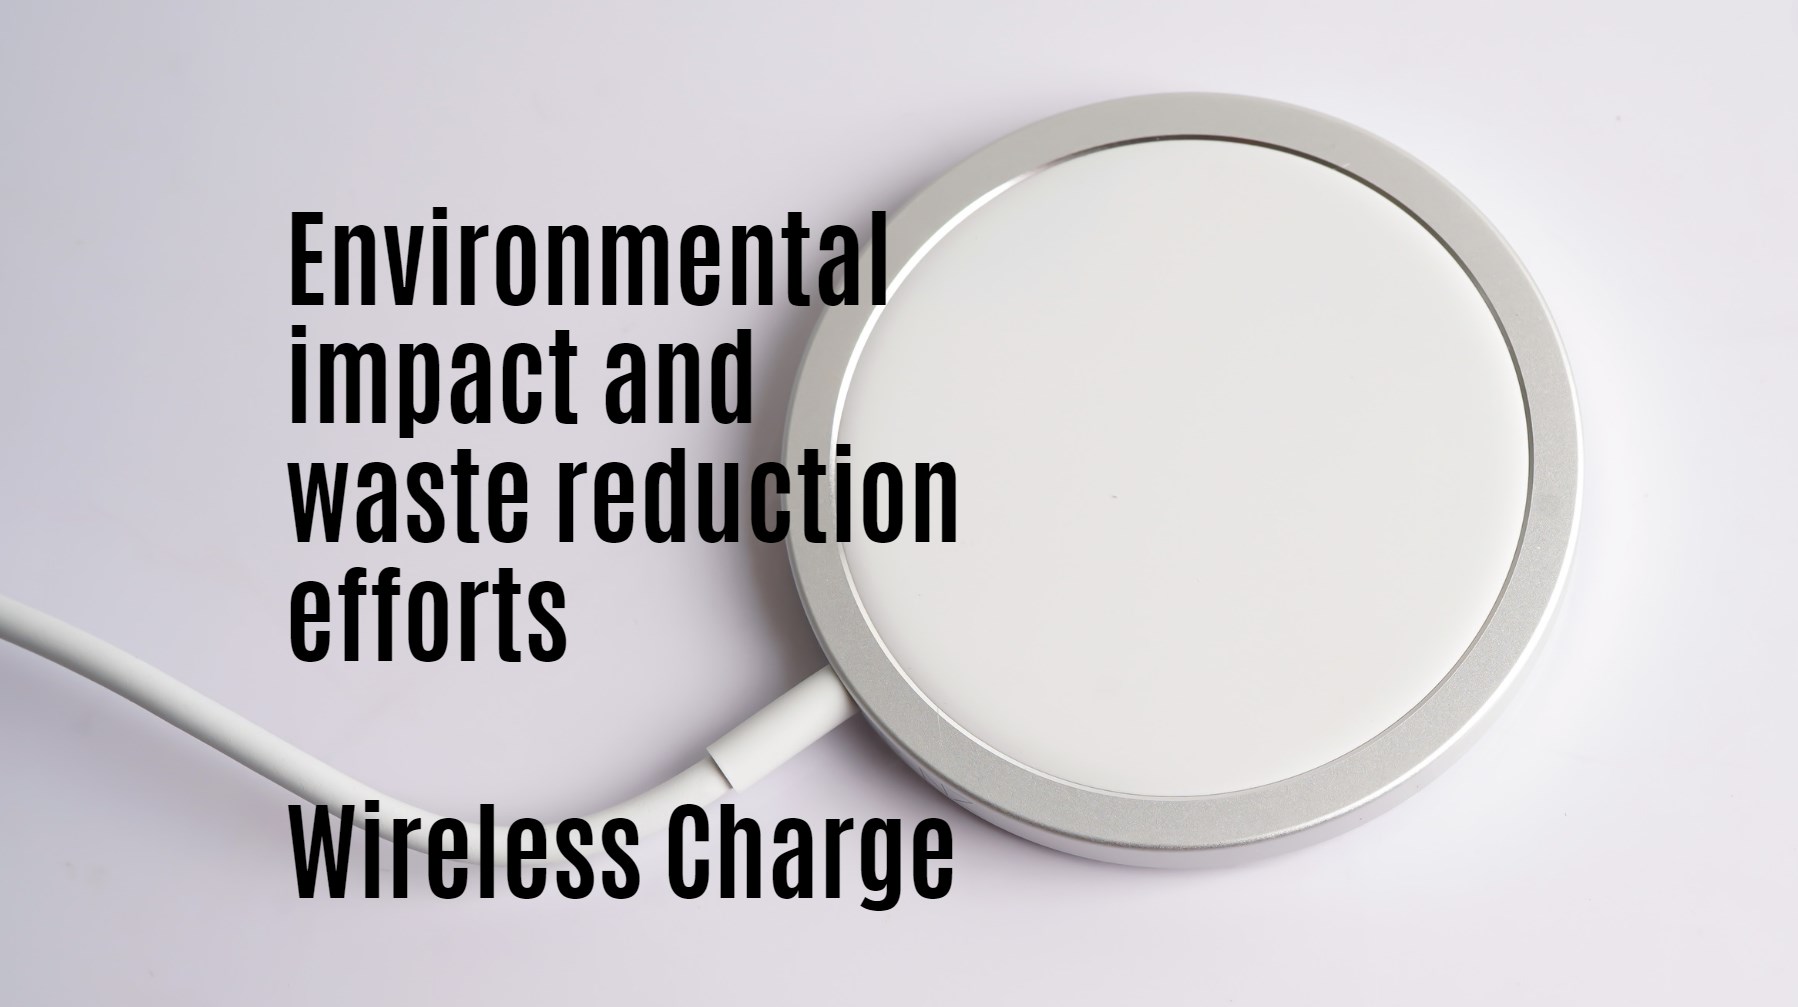 Environmental impact and waste reduction efforts, wireless charge